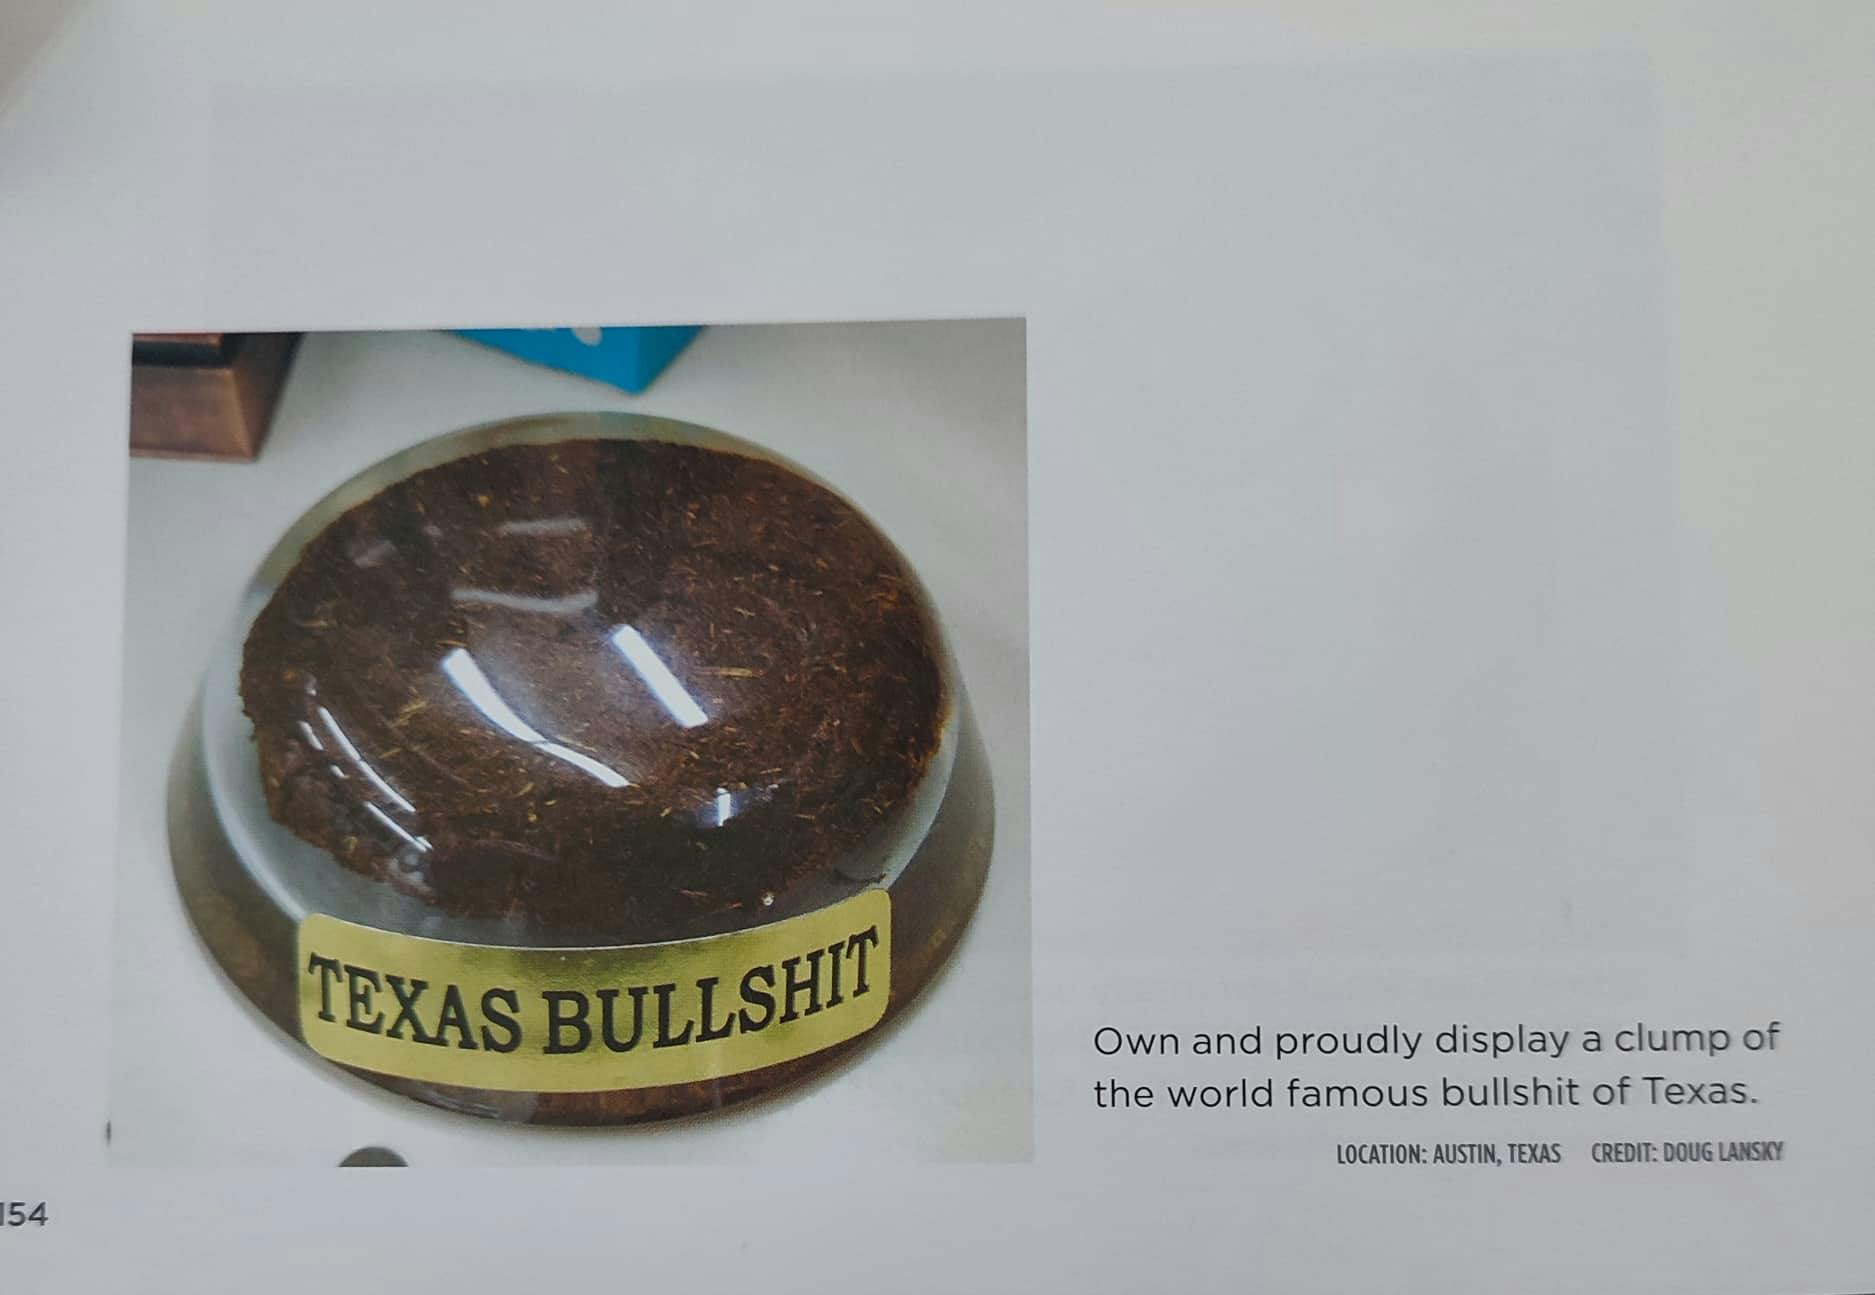 Bullshit of Texas, seen in Crap Souvenirs: The ultimate Kitsch Collection by Doug Lansky (2012)